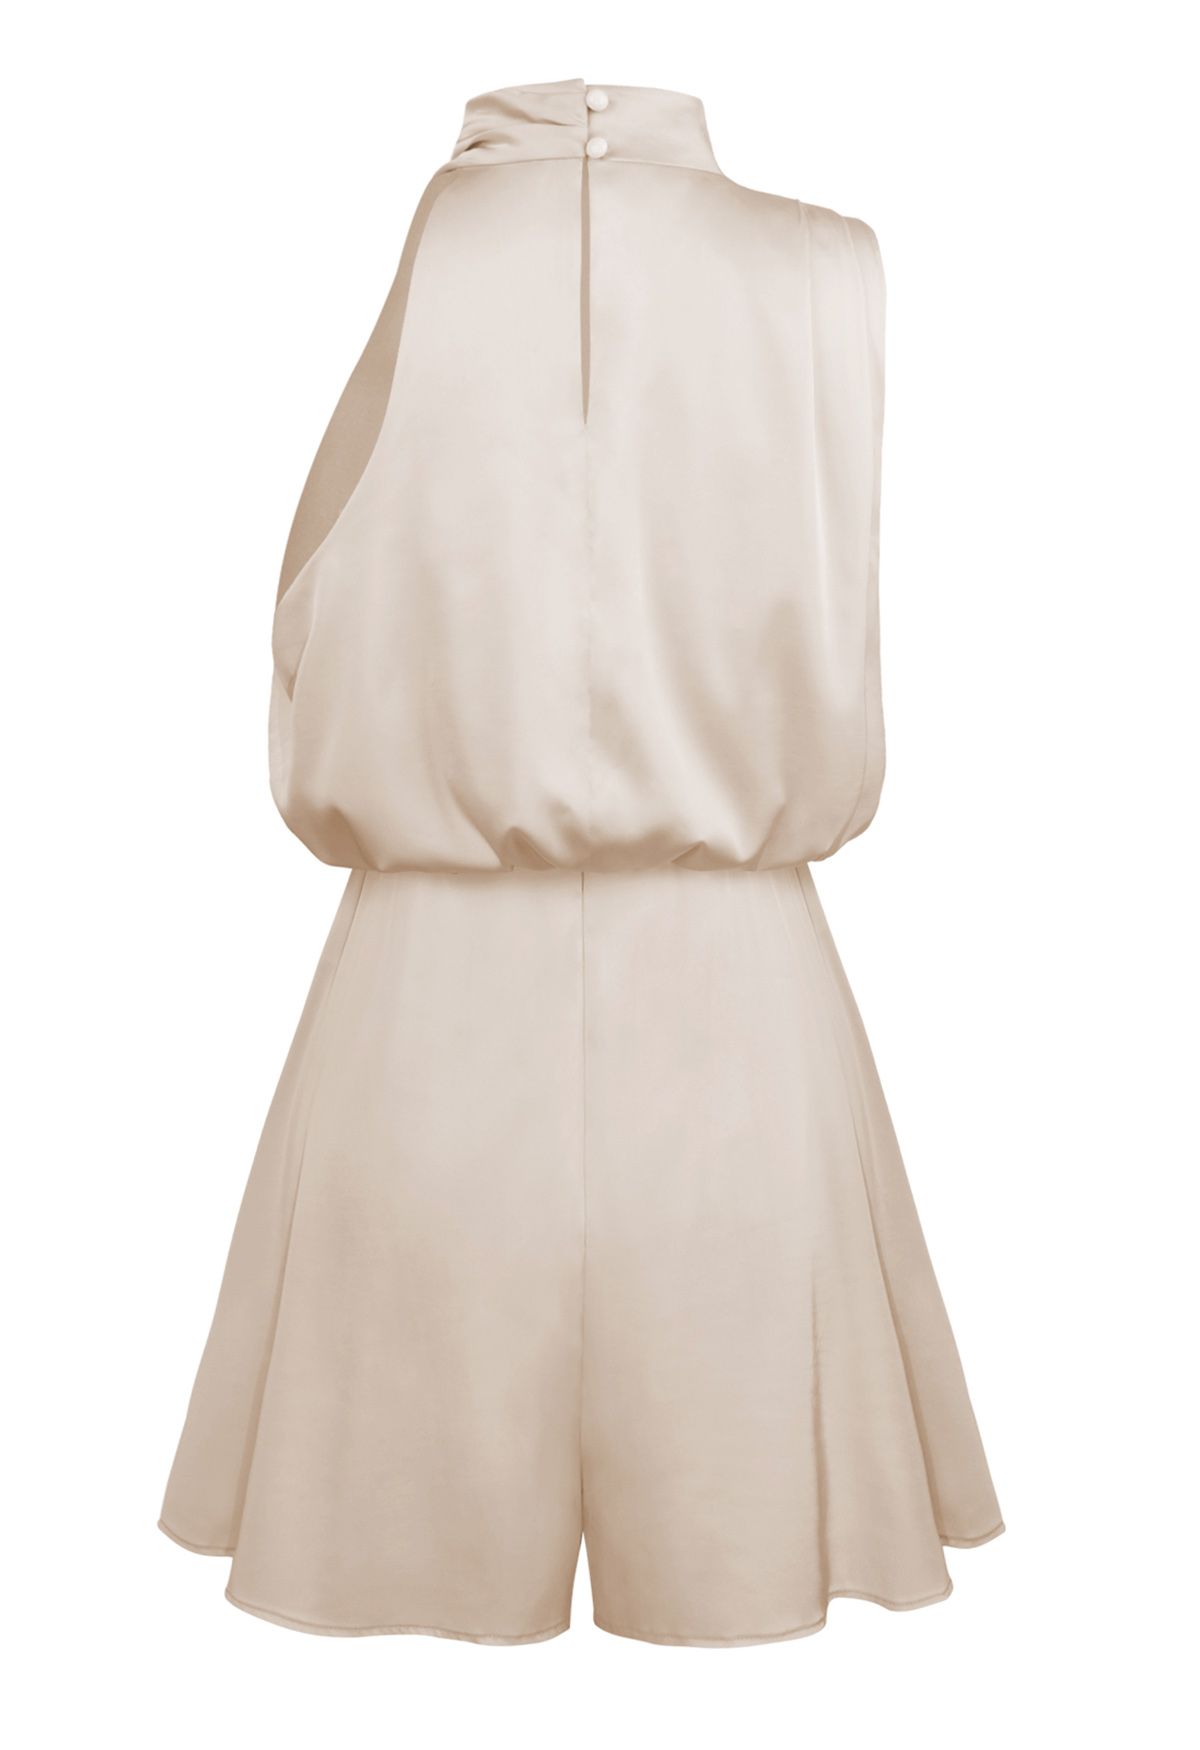 Satin Asymmetric Ruched Neckline Sleeveless Playsuit in Apricot